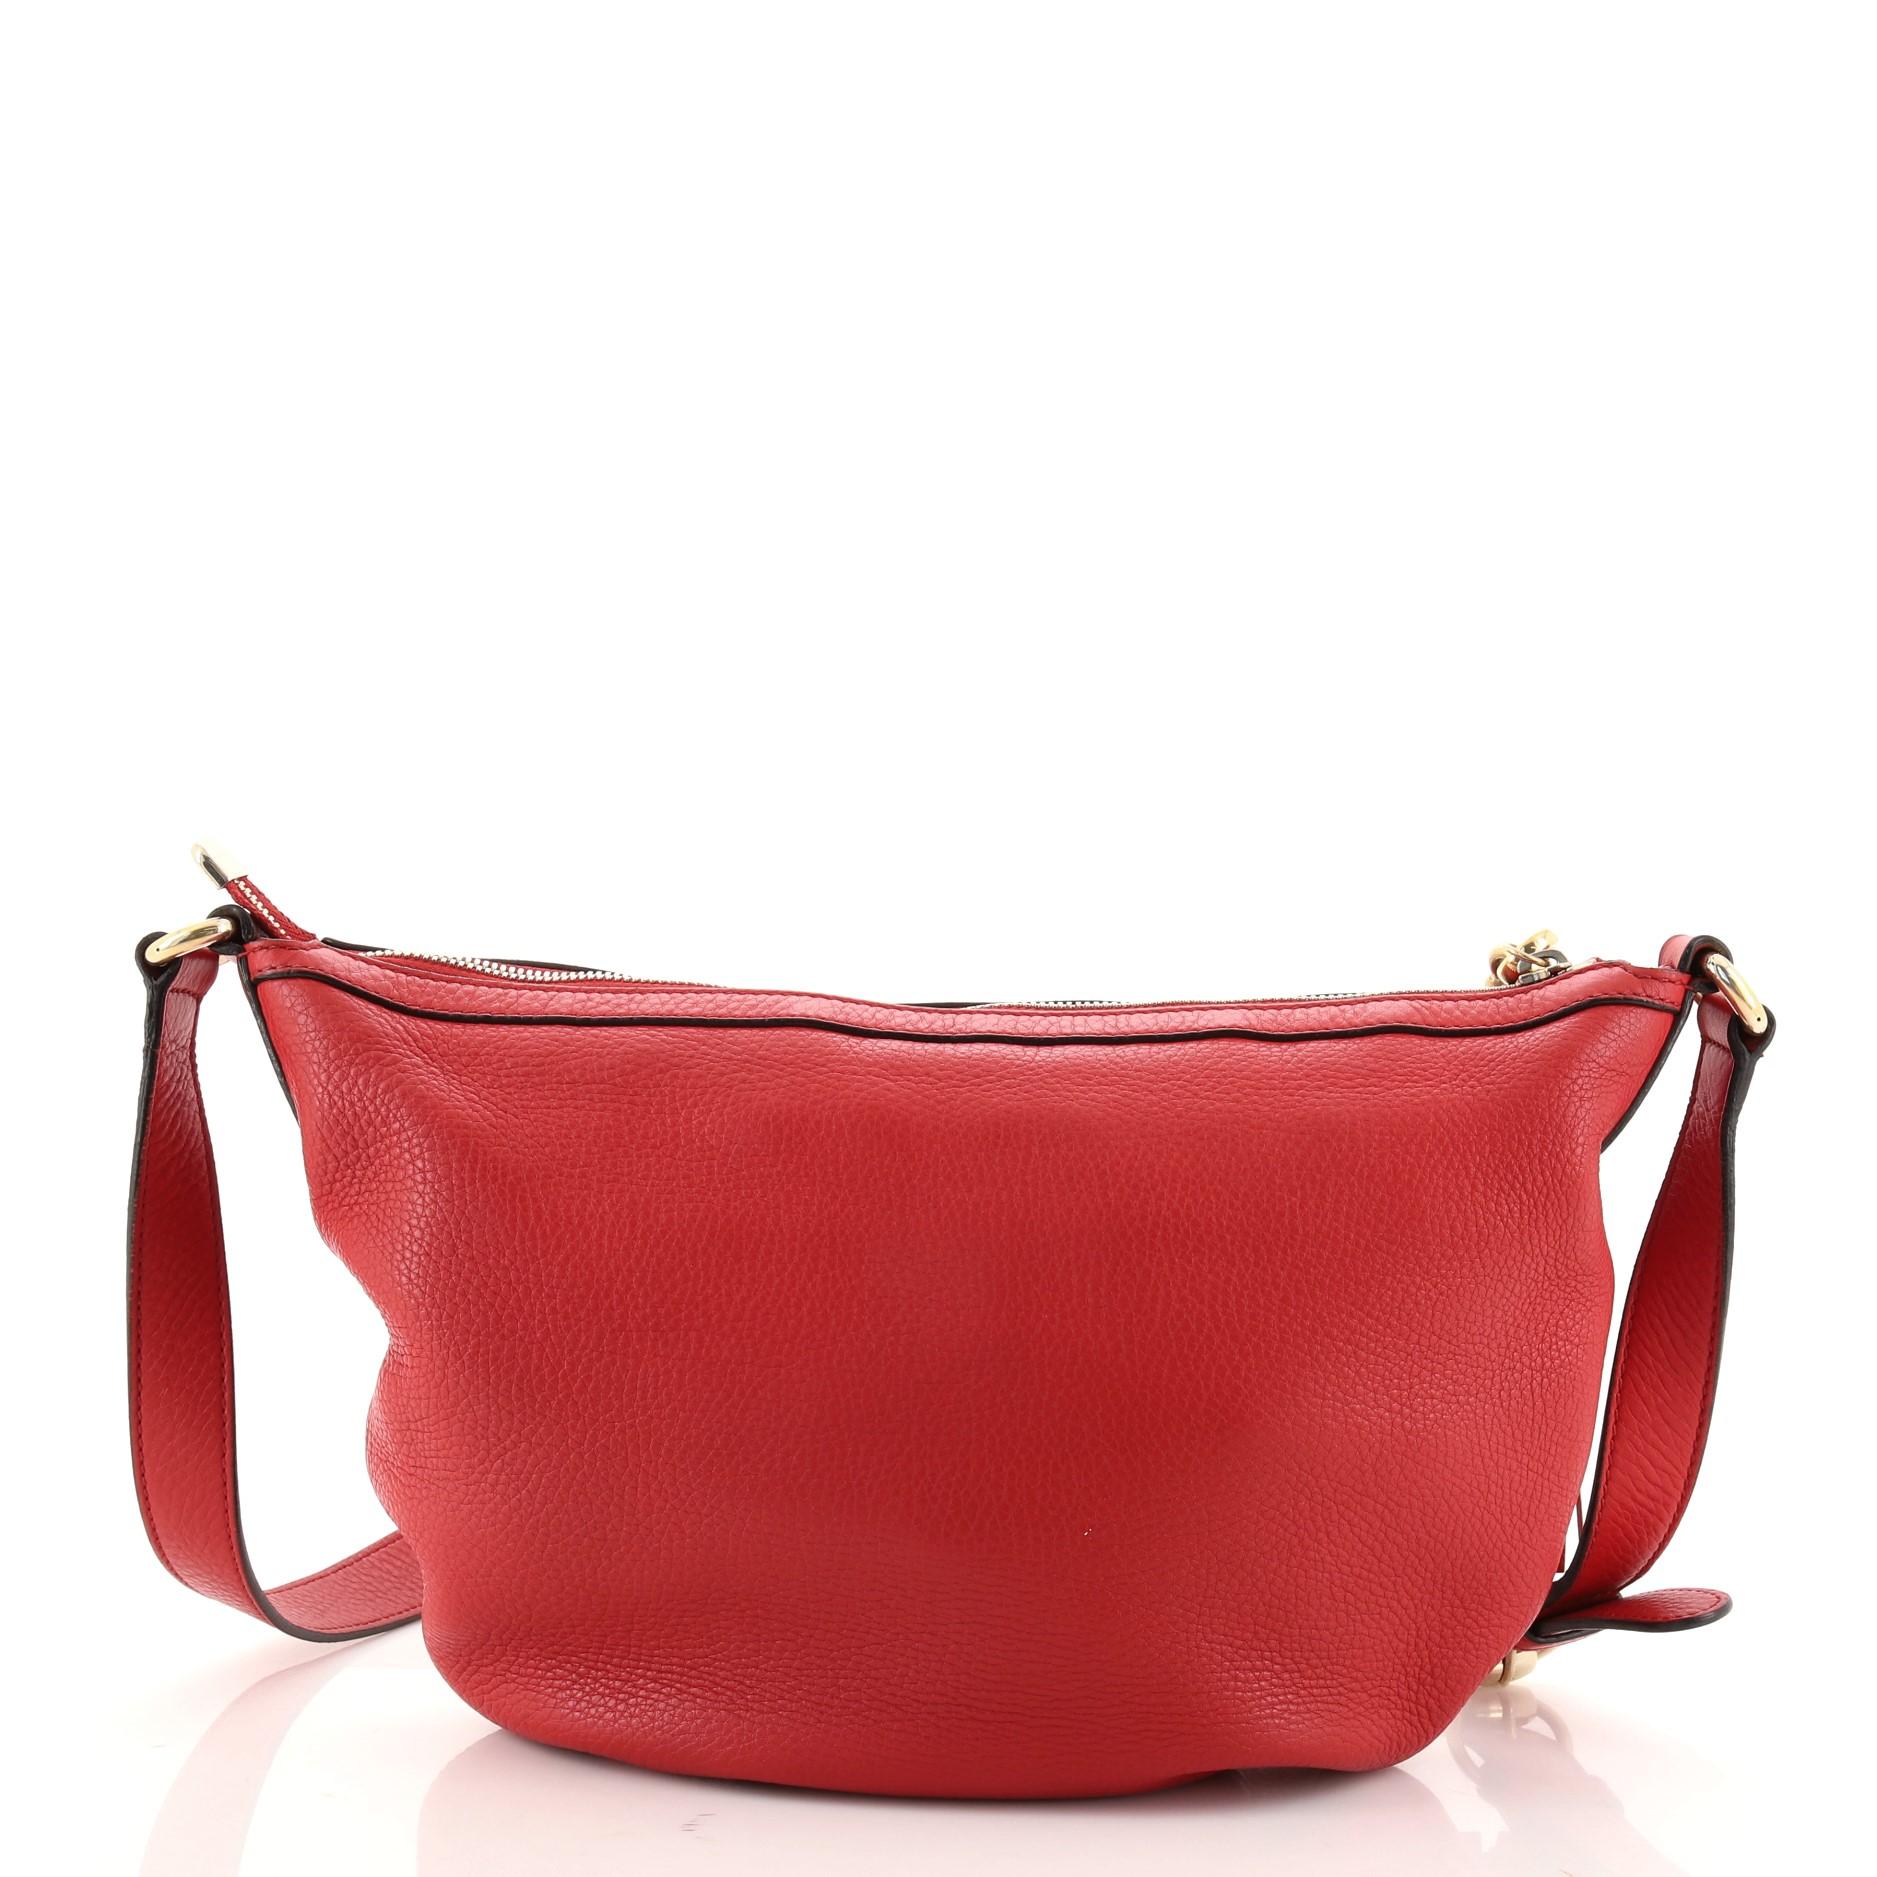 Red Gucci Soho Messenger Bag Leather Small